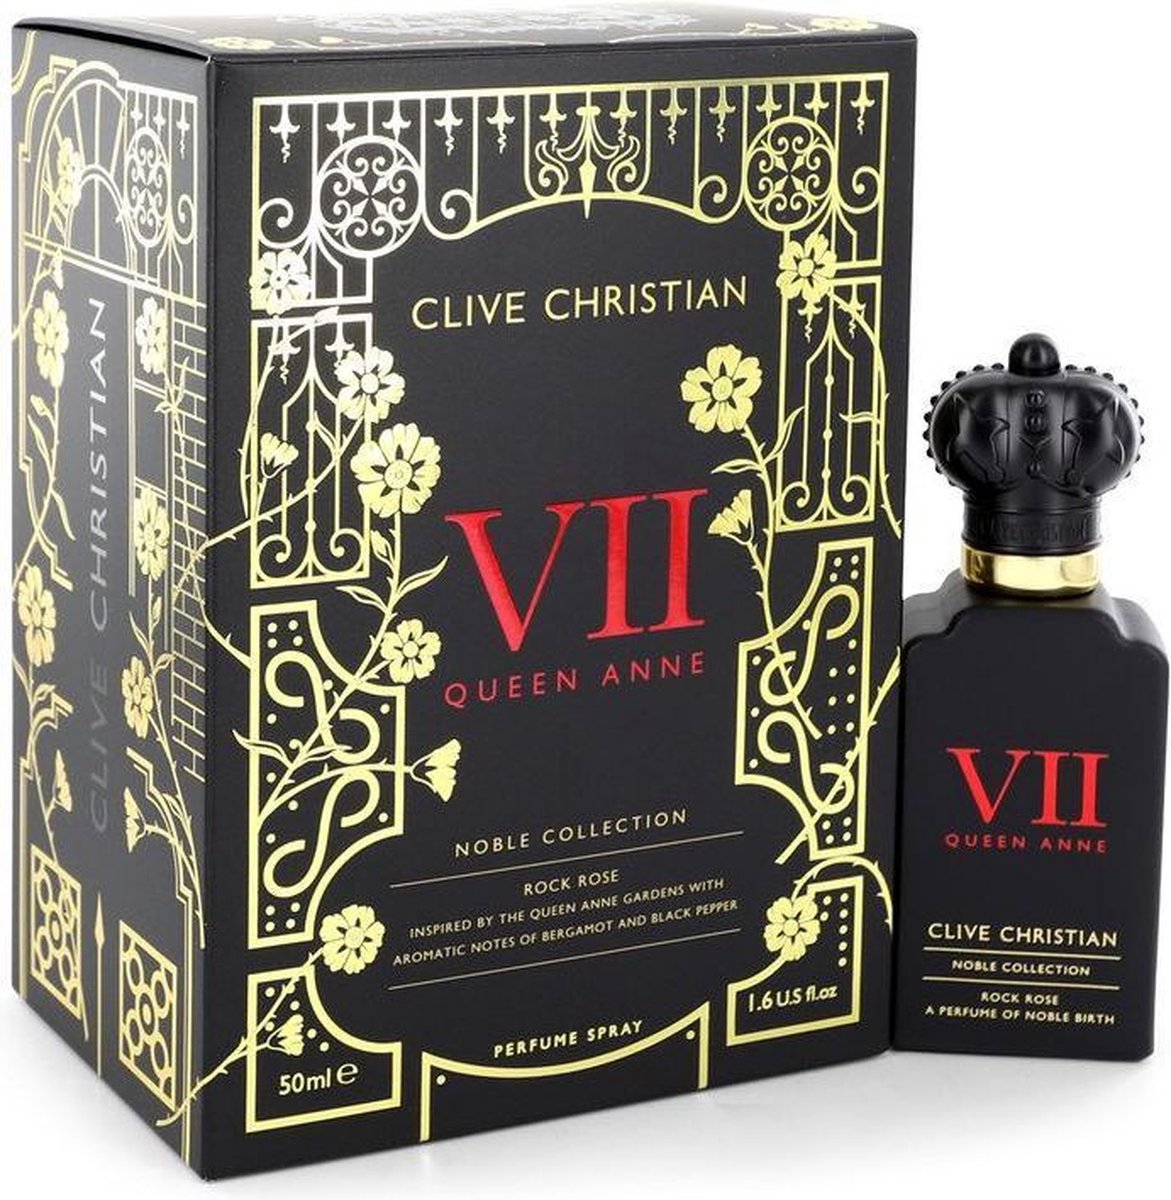 Clive Christian VII Queen Anne Rock Rose by Clive Christian 50 ml - Perfume Spray